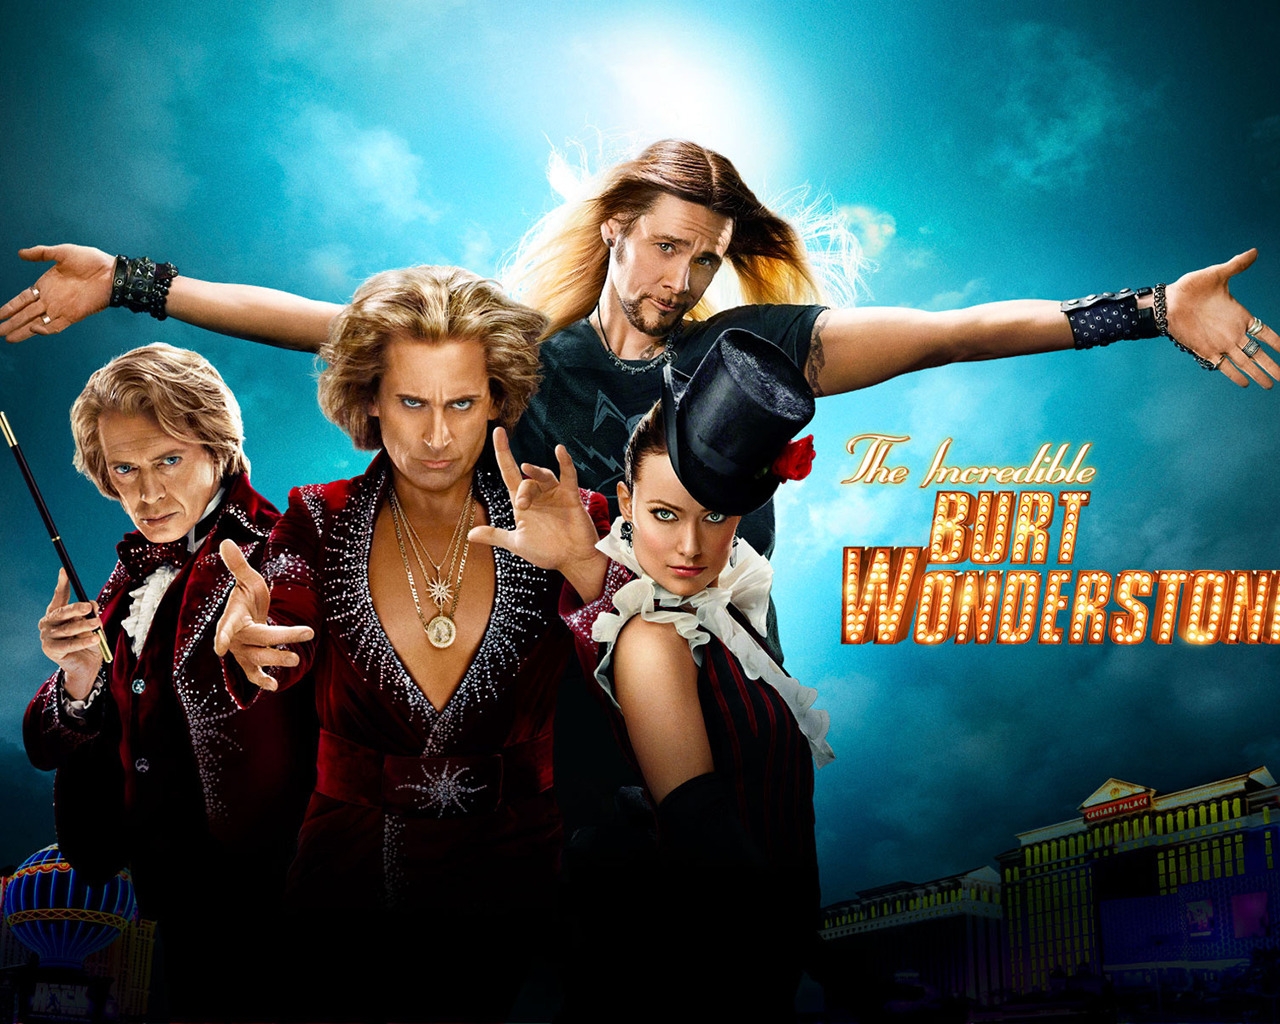 2013 The Incredible Burt Wonderstone Poster for 1280 x 1024 resolution